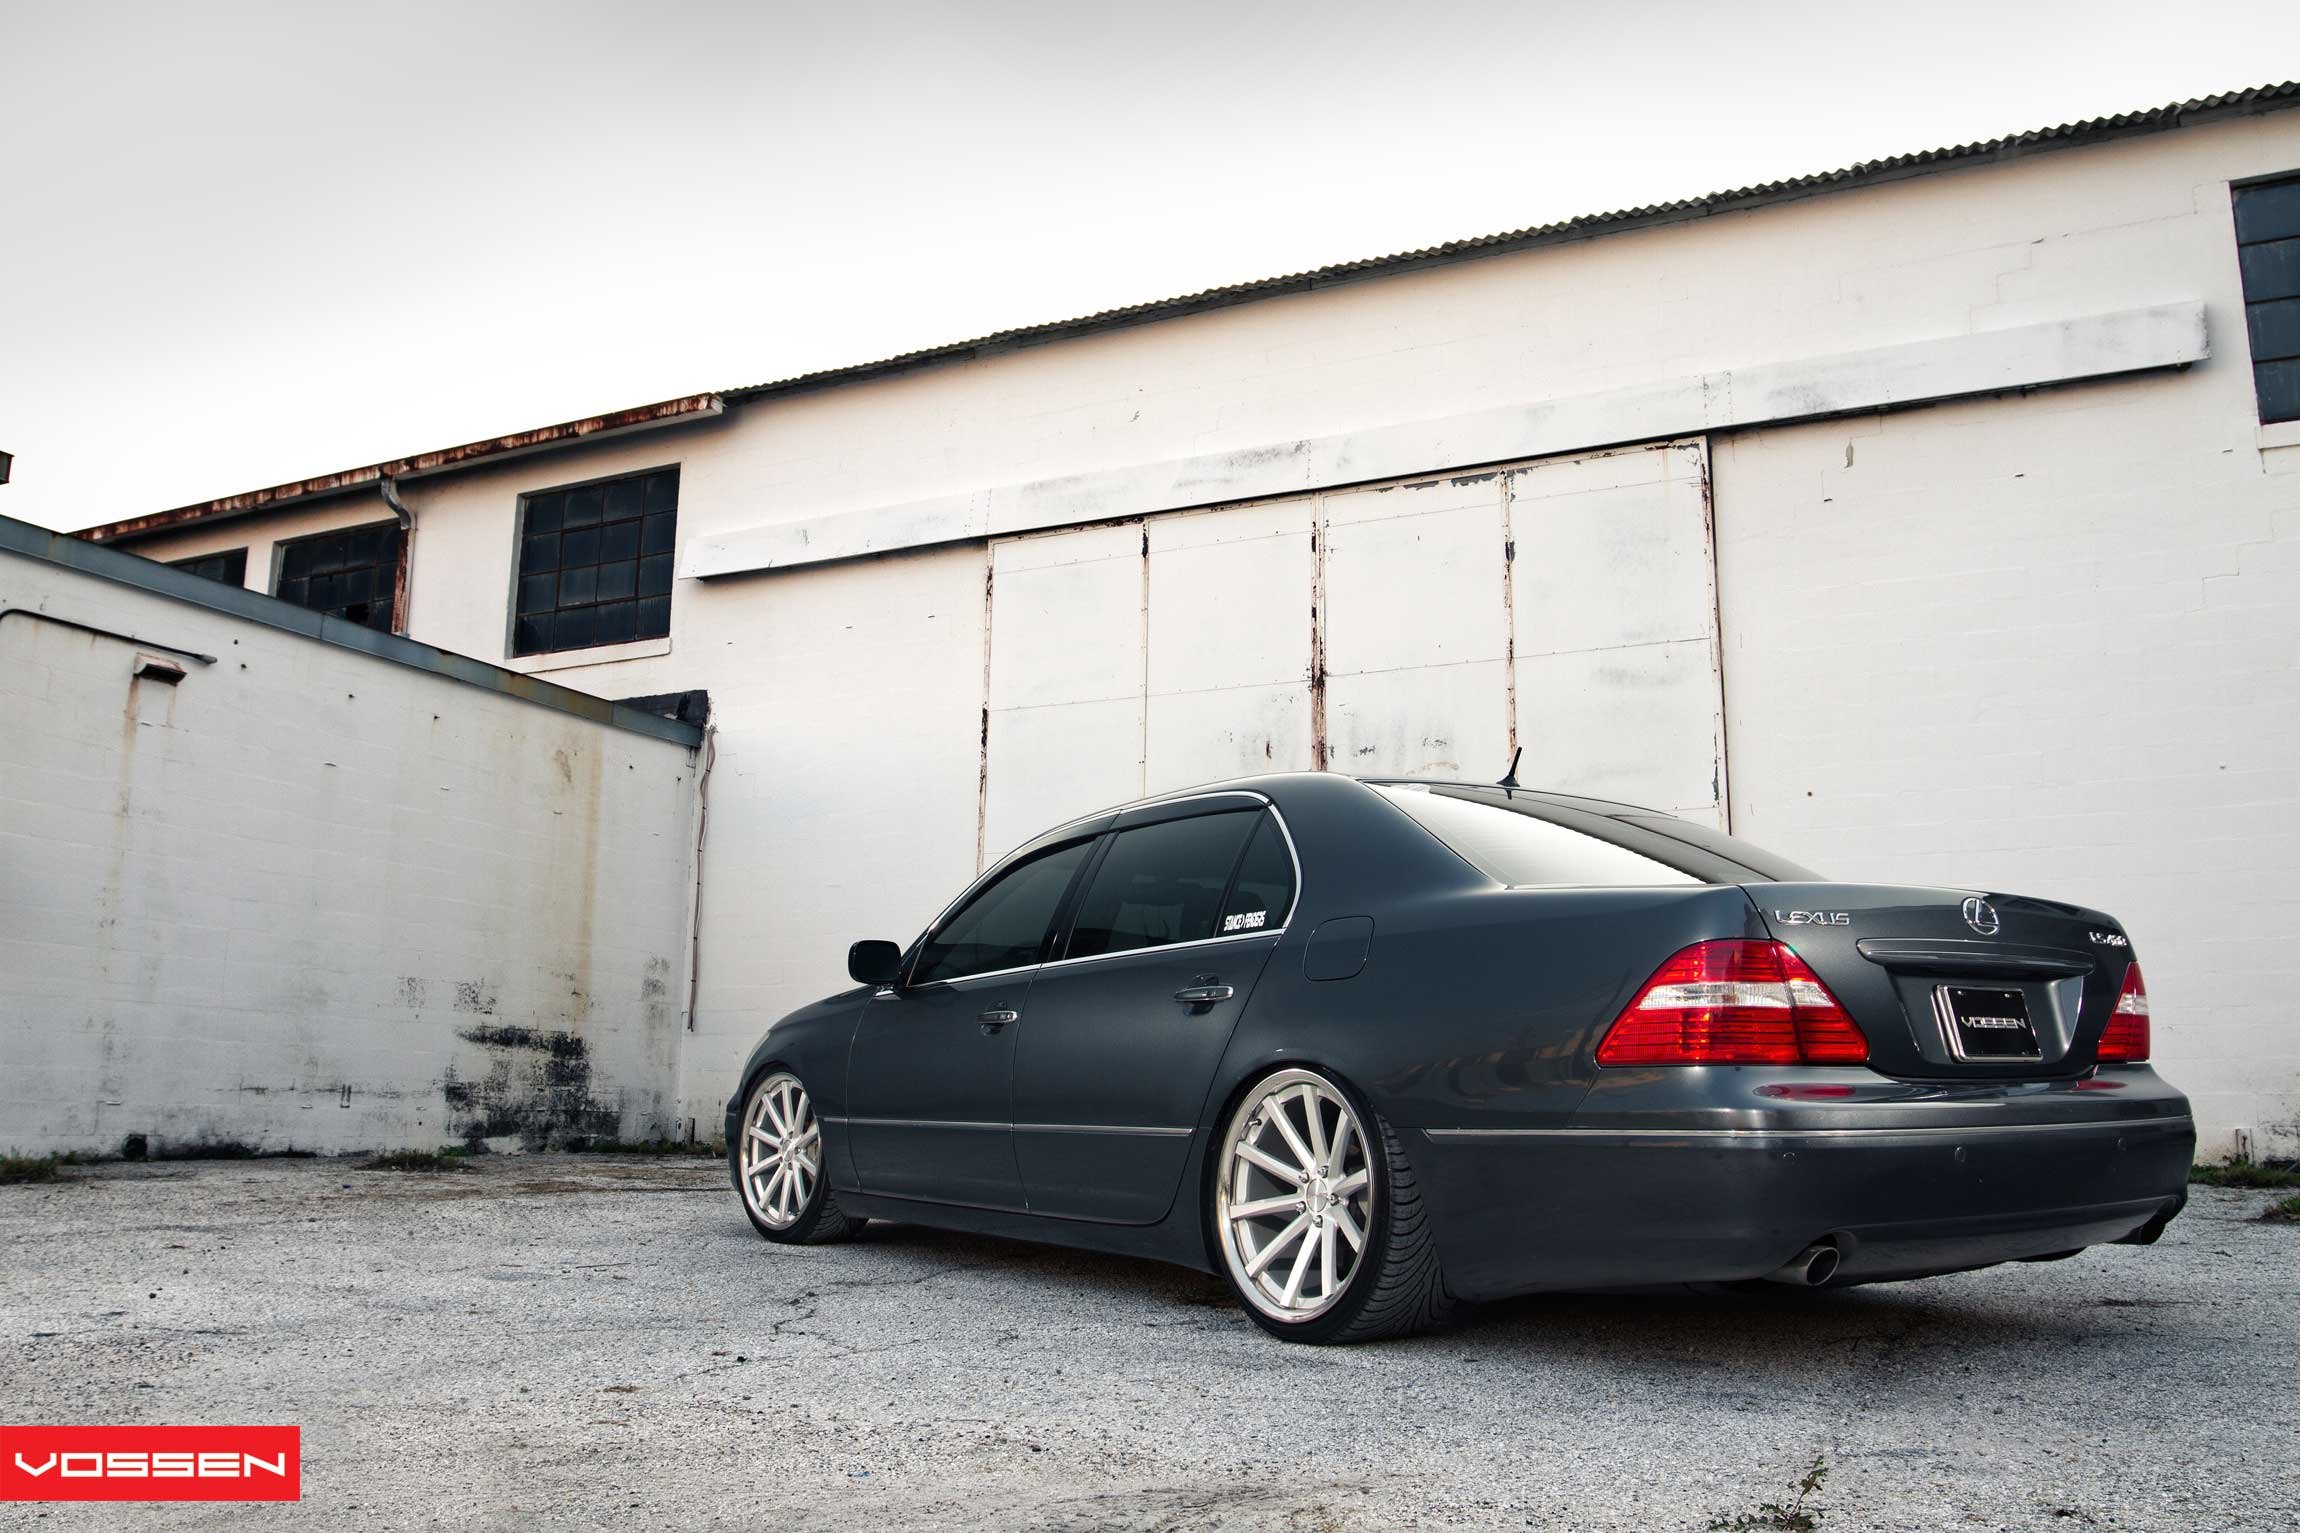 Red LED Taillights on Black Lexus LS - Photo by Vossen